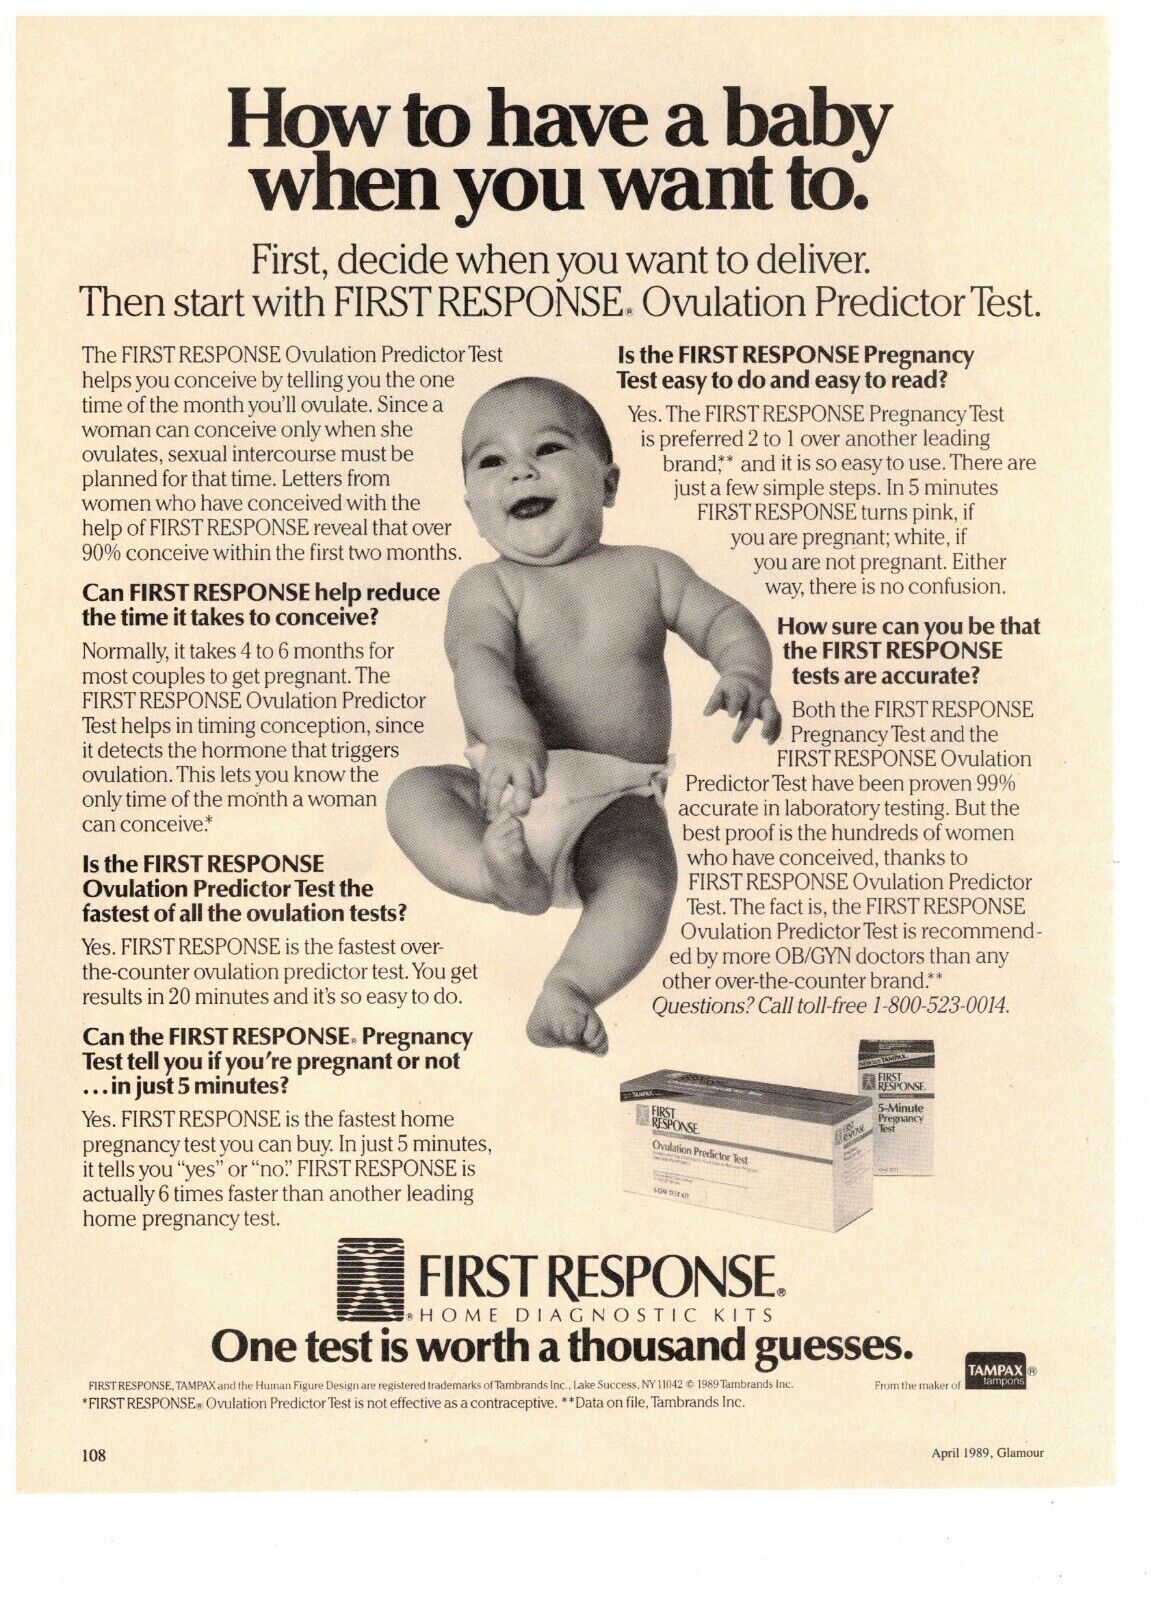 1989 First Response Home Diagnostic Kits Ovulation Test Vintage Print Ad